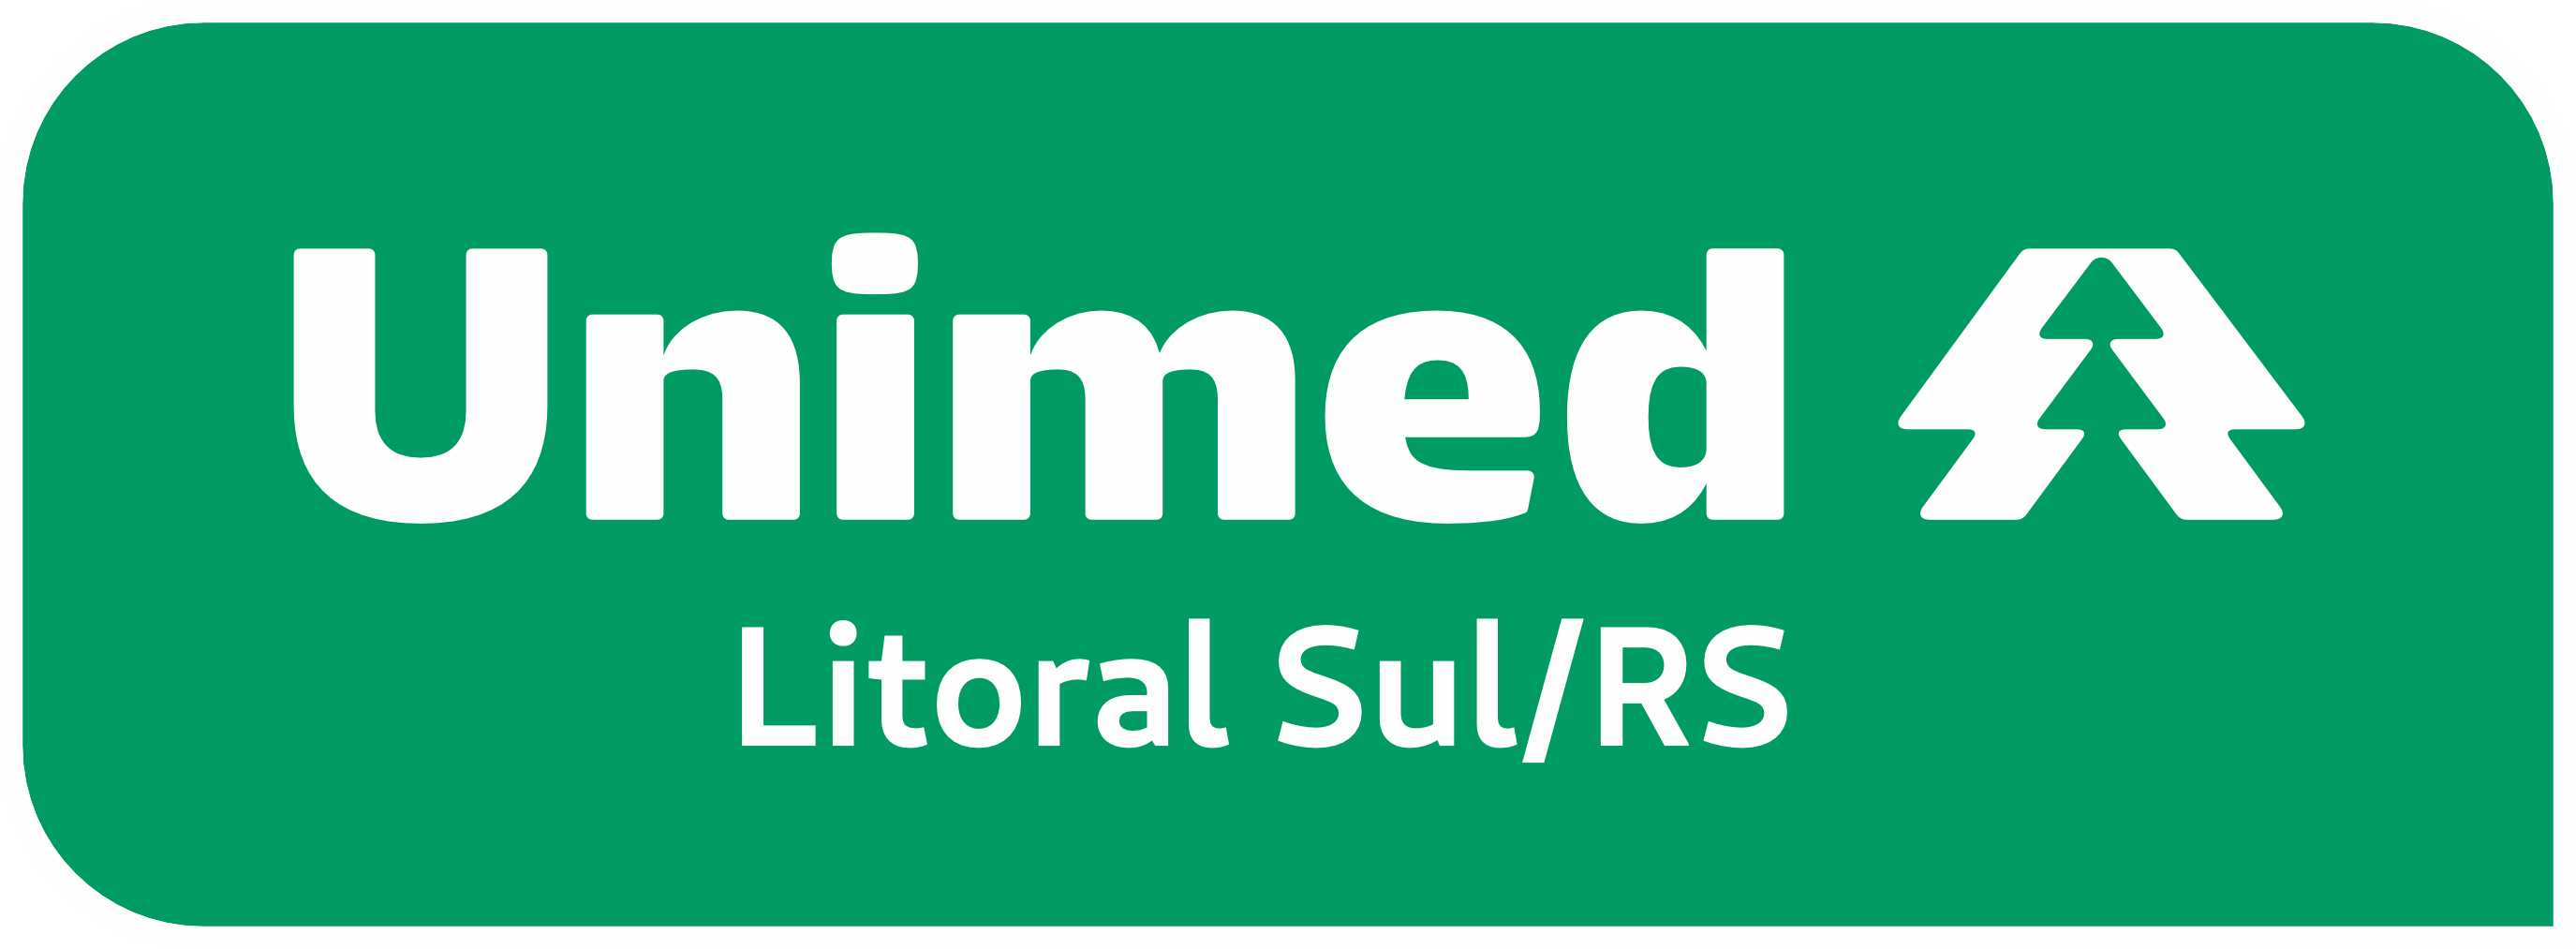 Unimed Litoral Sul/RS